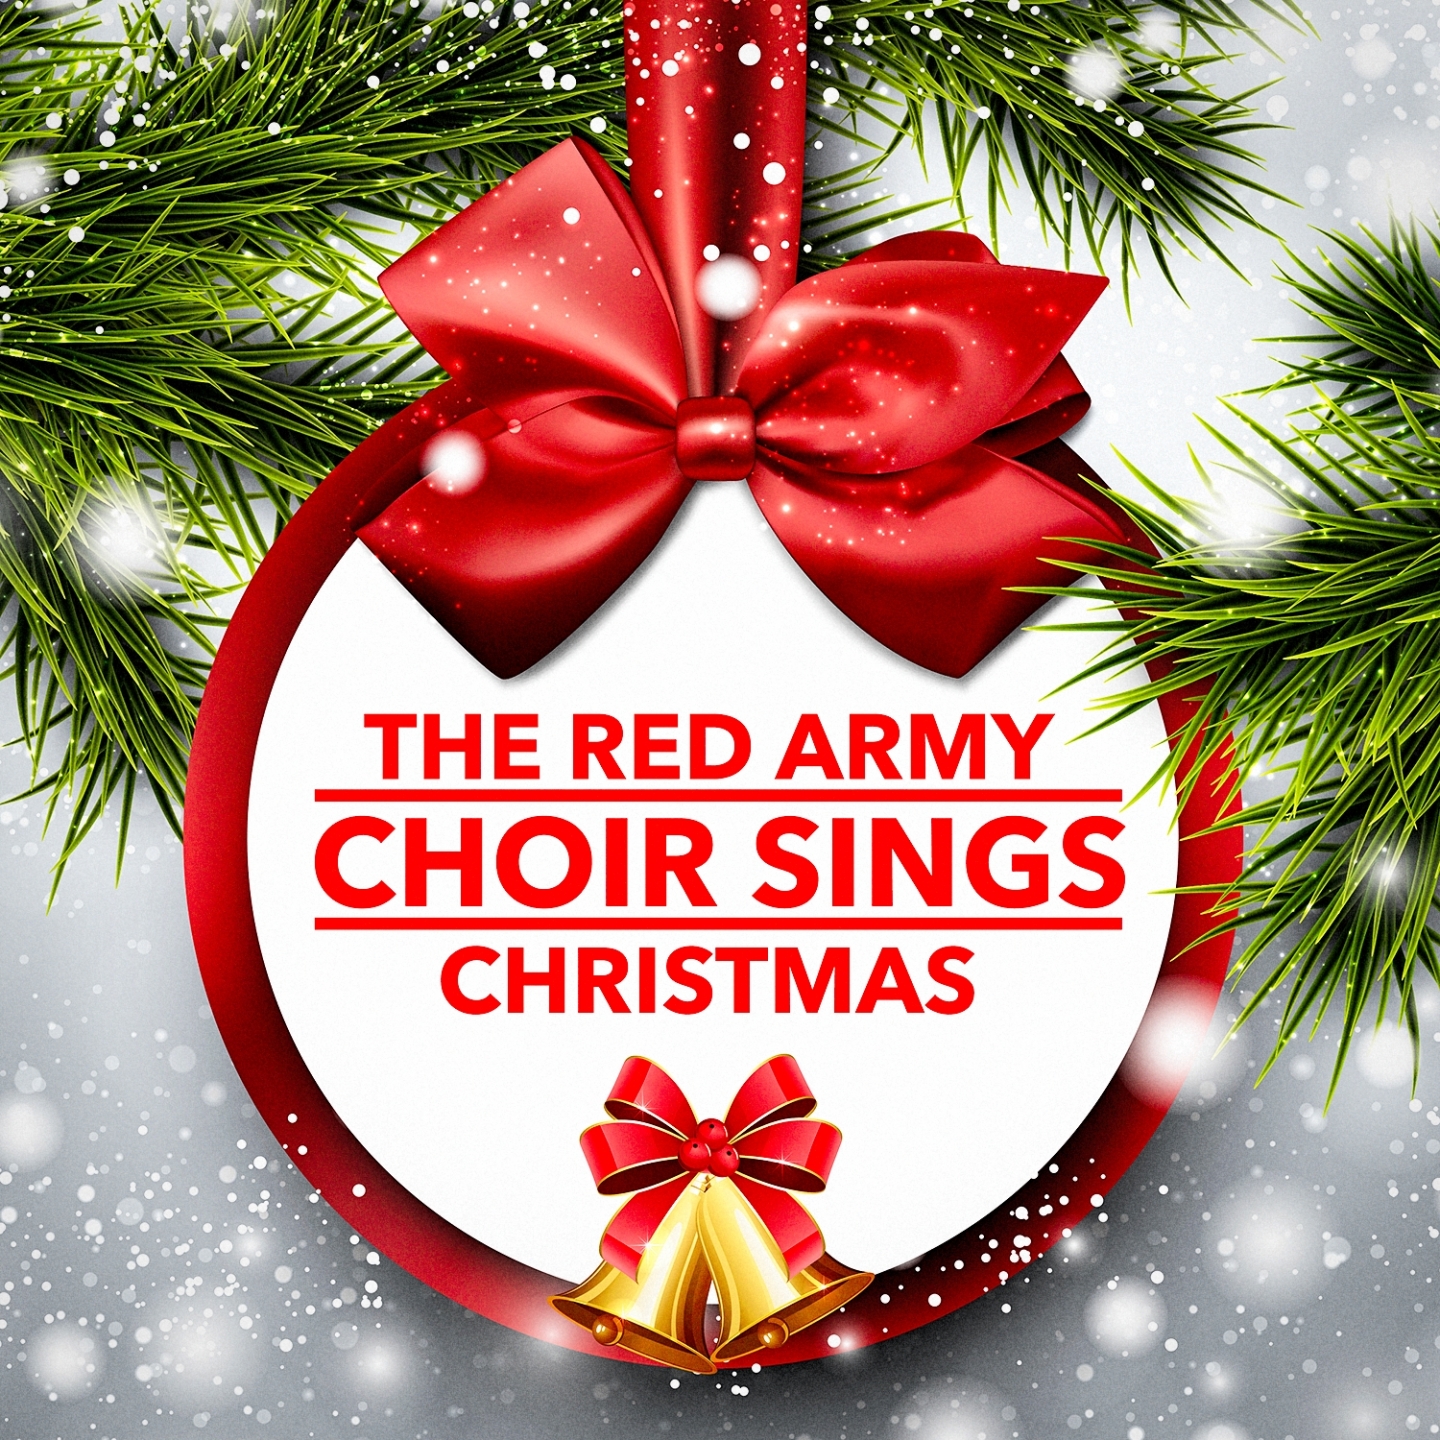 The Red Army Choir Sings Christmas (Their Most Beautiful Christmas Songs)